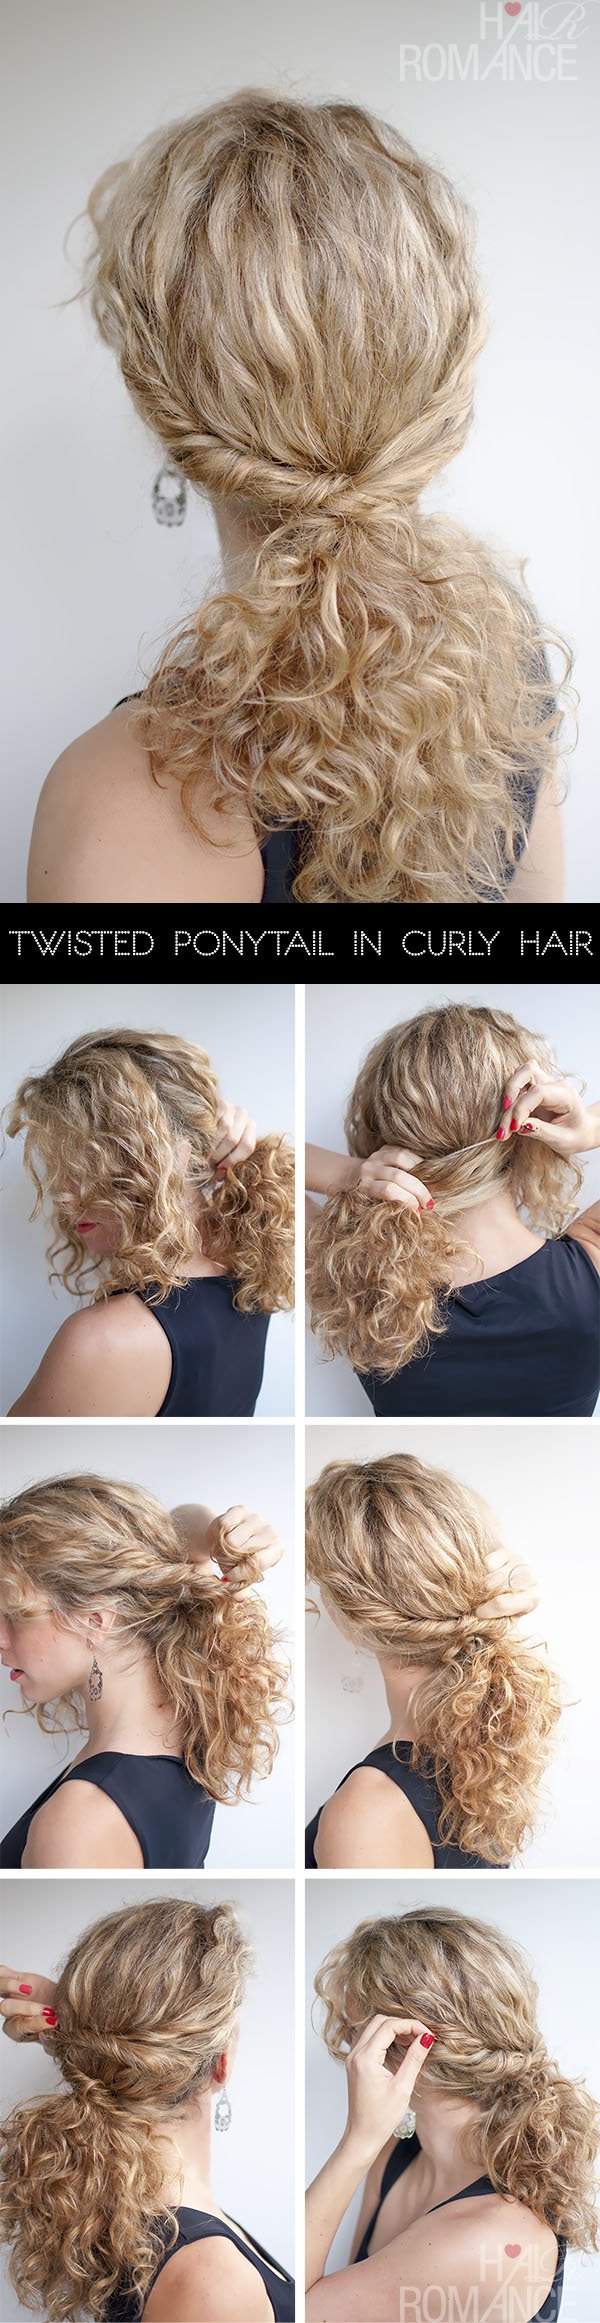 Chic Twisted Ponytail Hairstyle Tutorial for Women